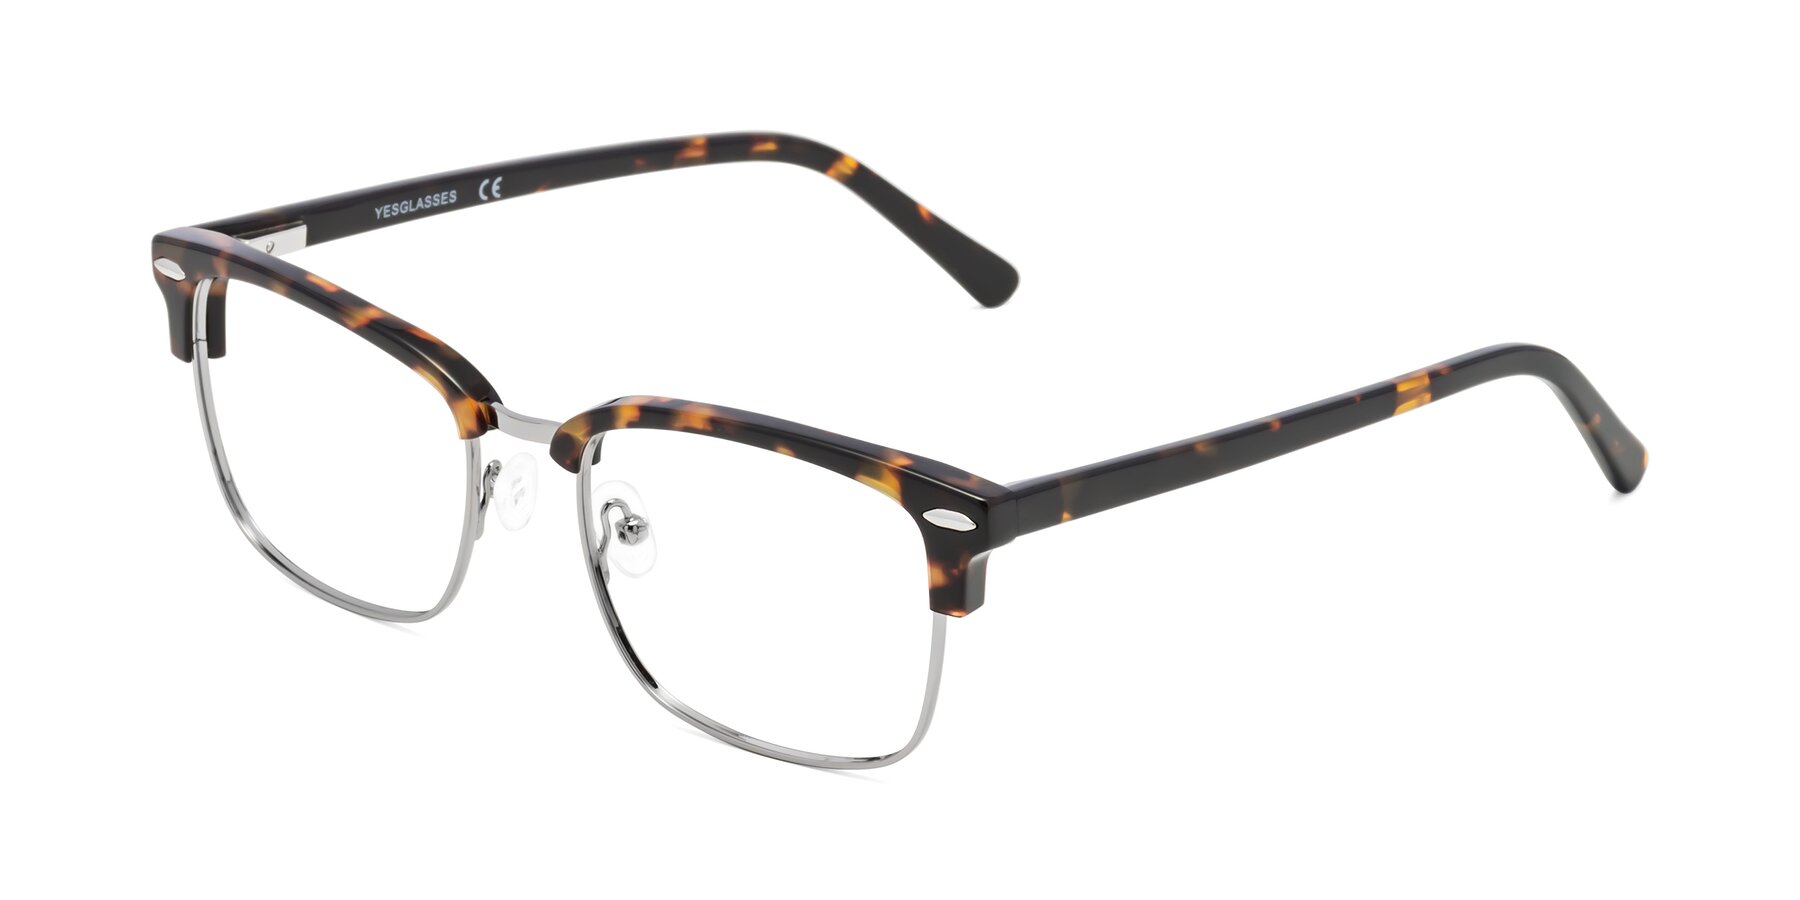 Angle of 17464 in Tortoise/ Gunmetal with Clear Blue Light Blocking Lenses